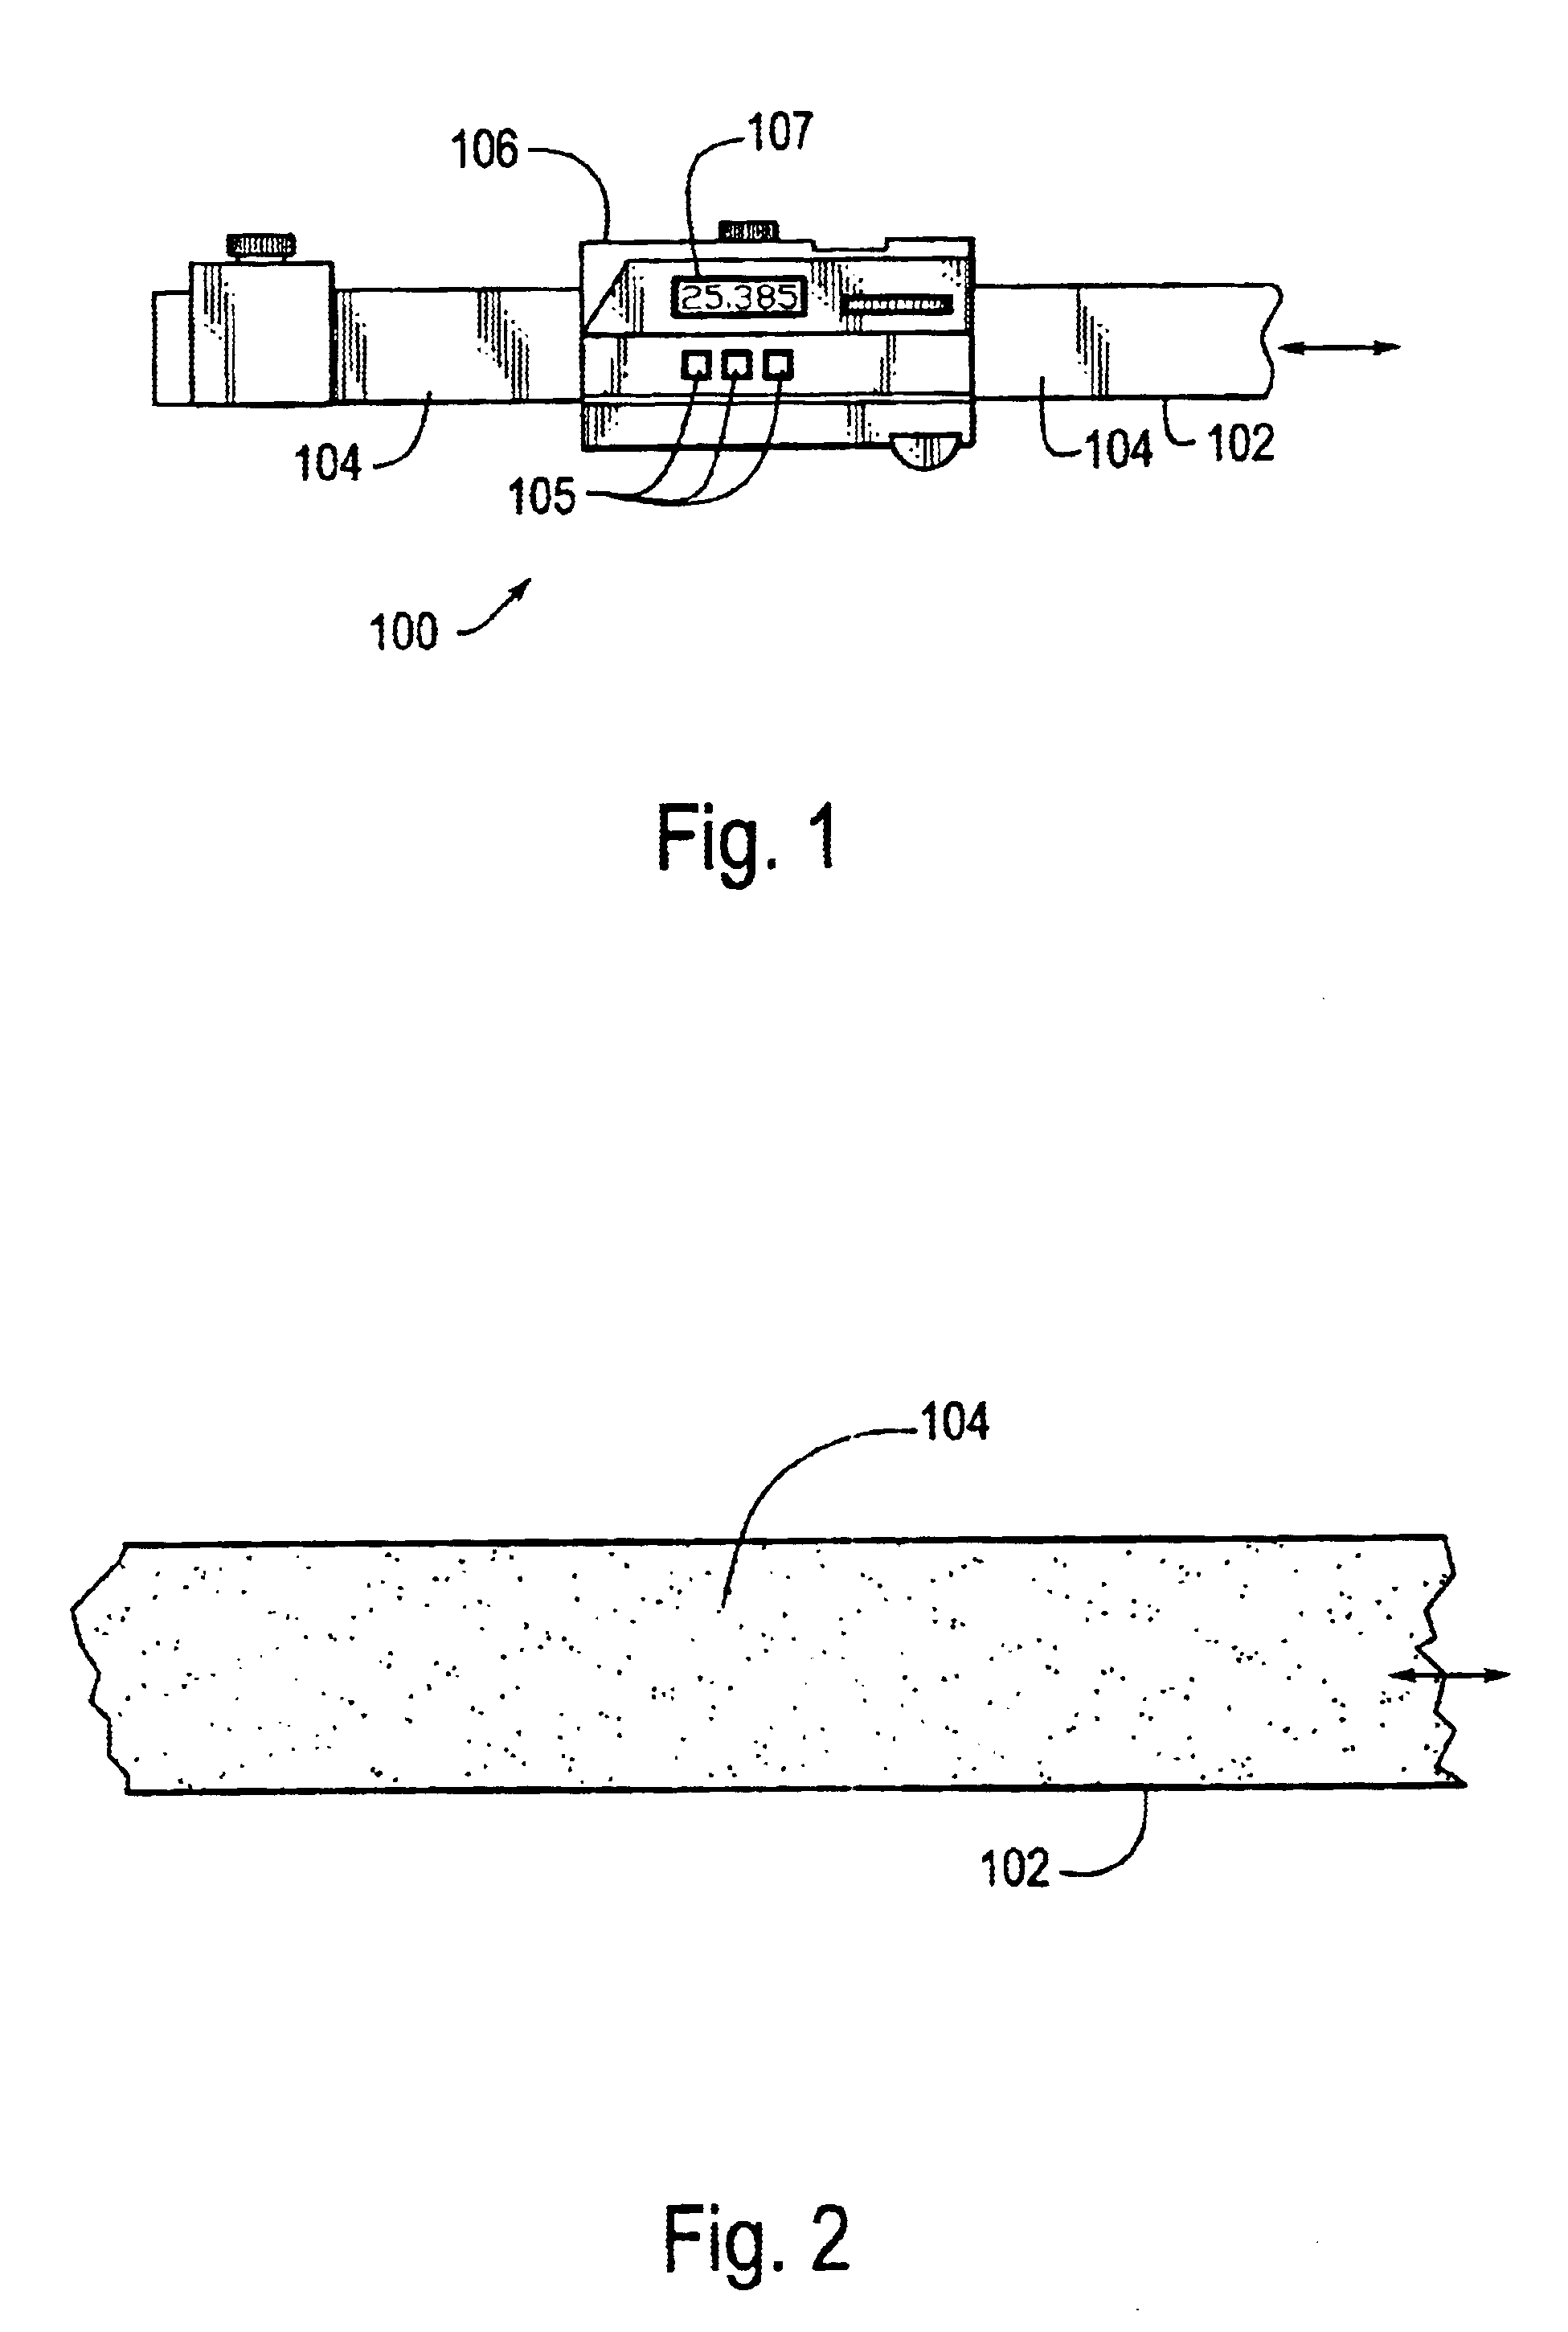 Speckle-image-based optical position transducer having improved mounting and directional sensitivities